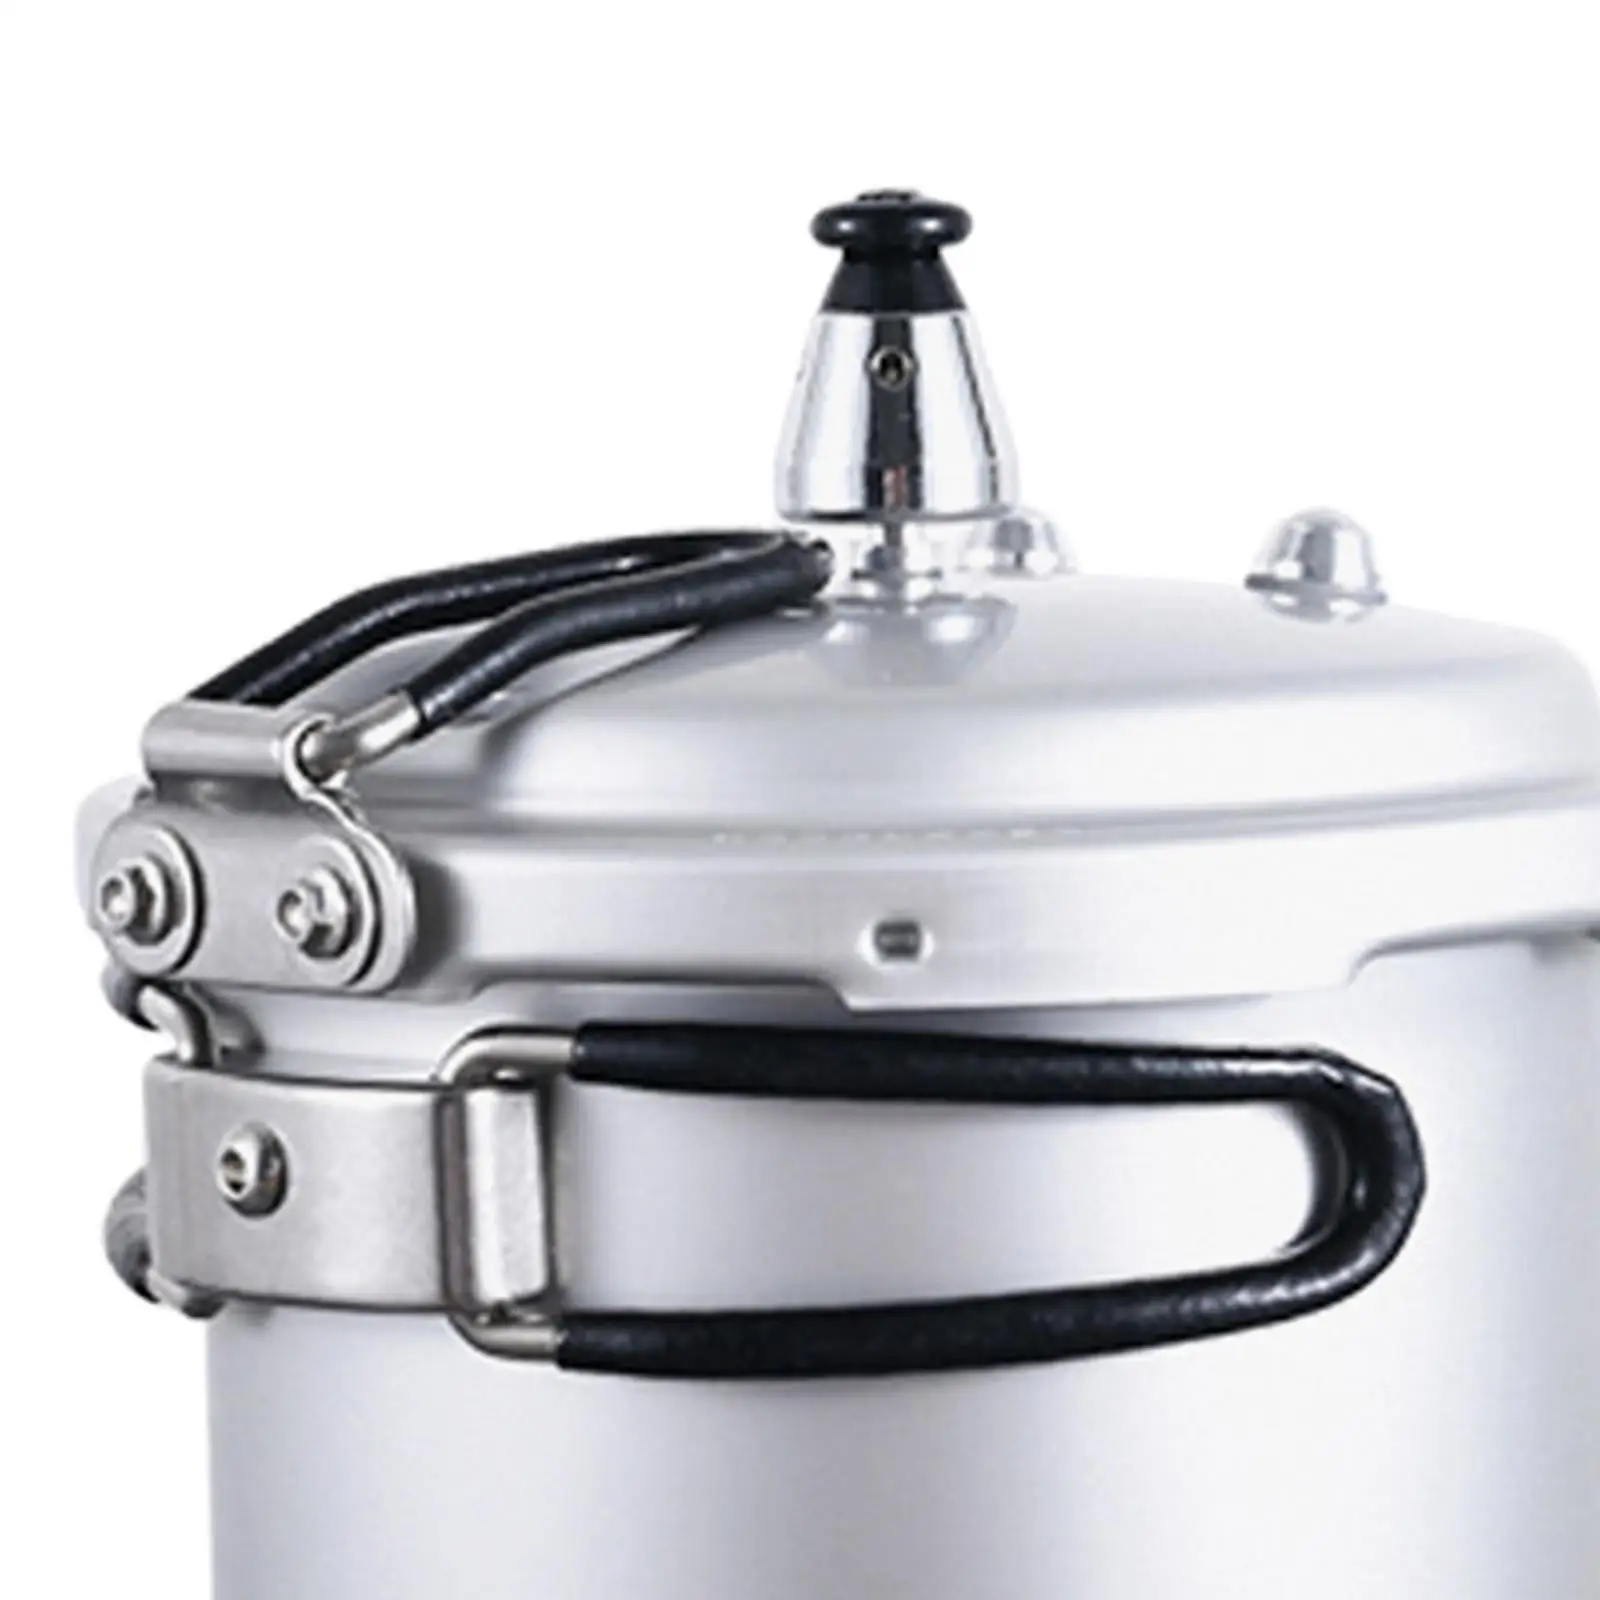 Camping pressure cooker with non-stick coating, for travel in the kitchen